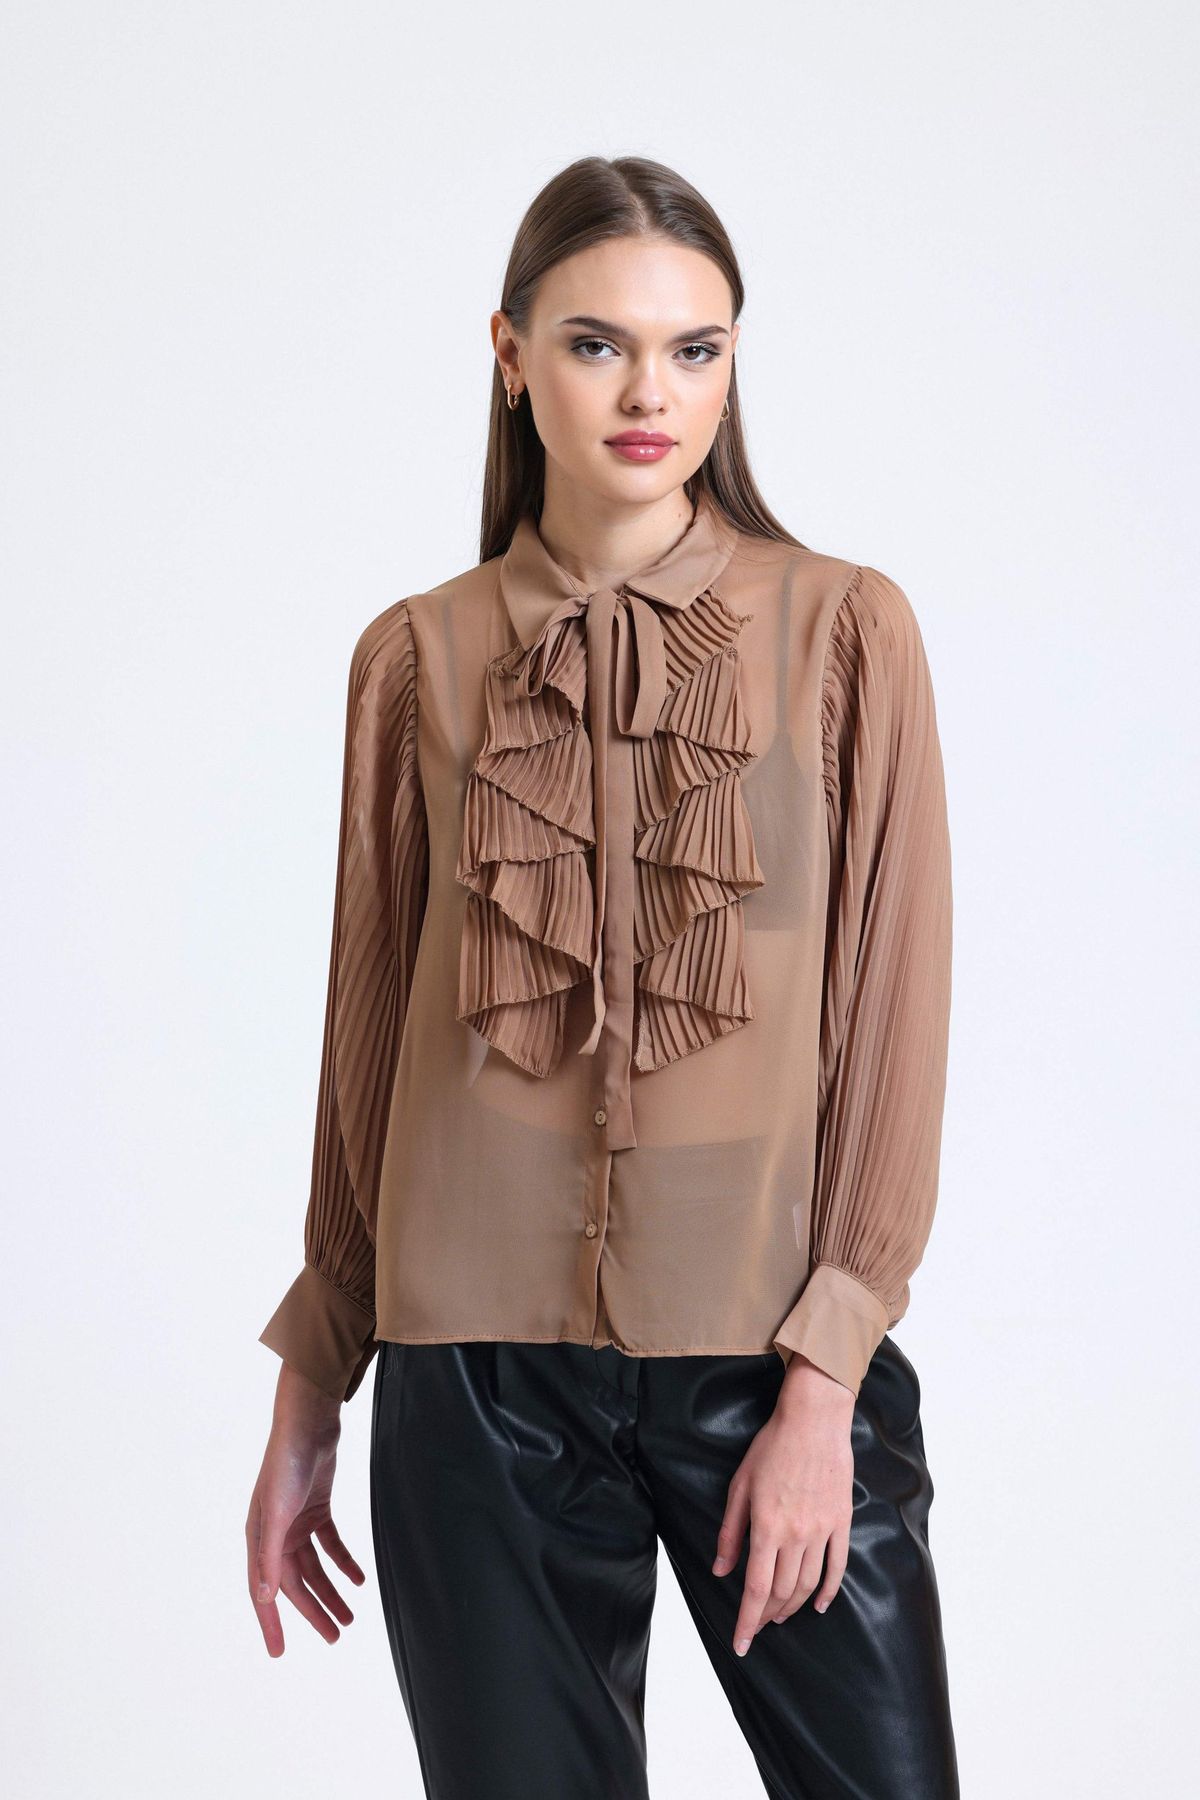 Chiffon Shirt with a Bow Details on the Neck